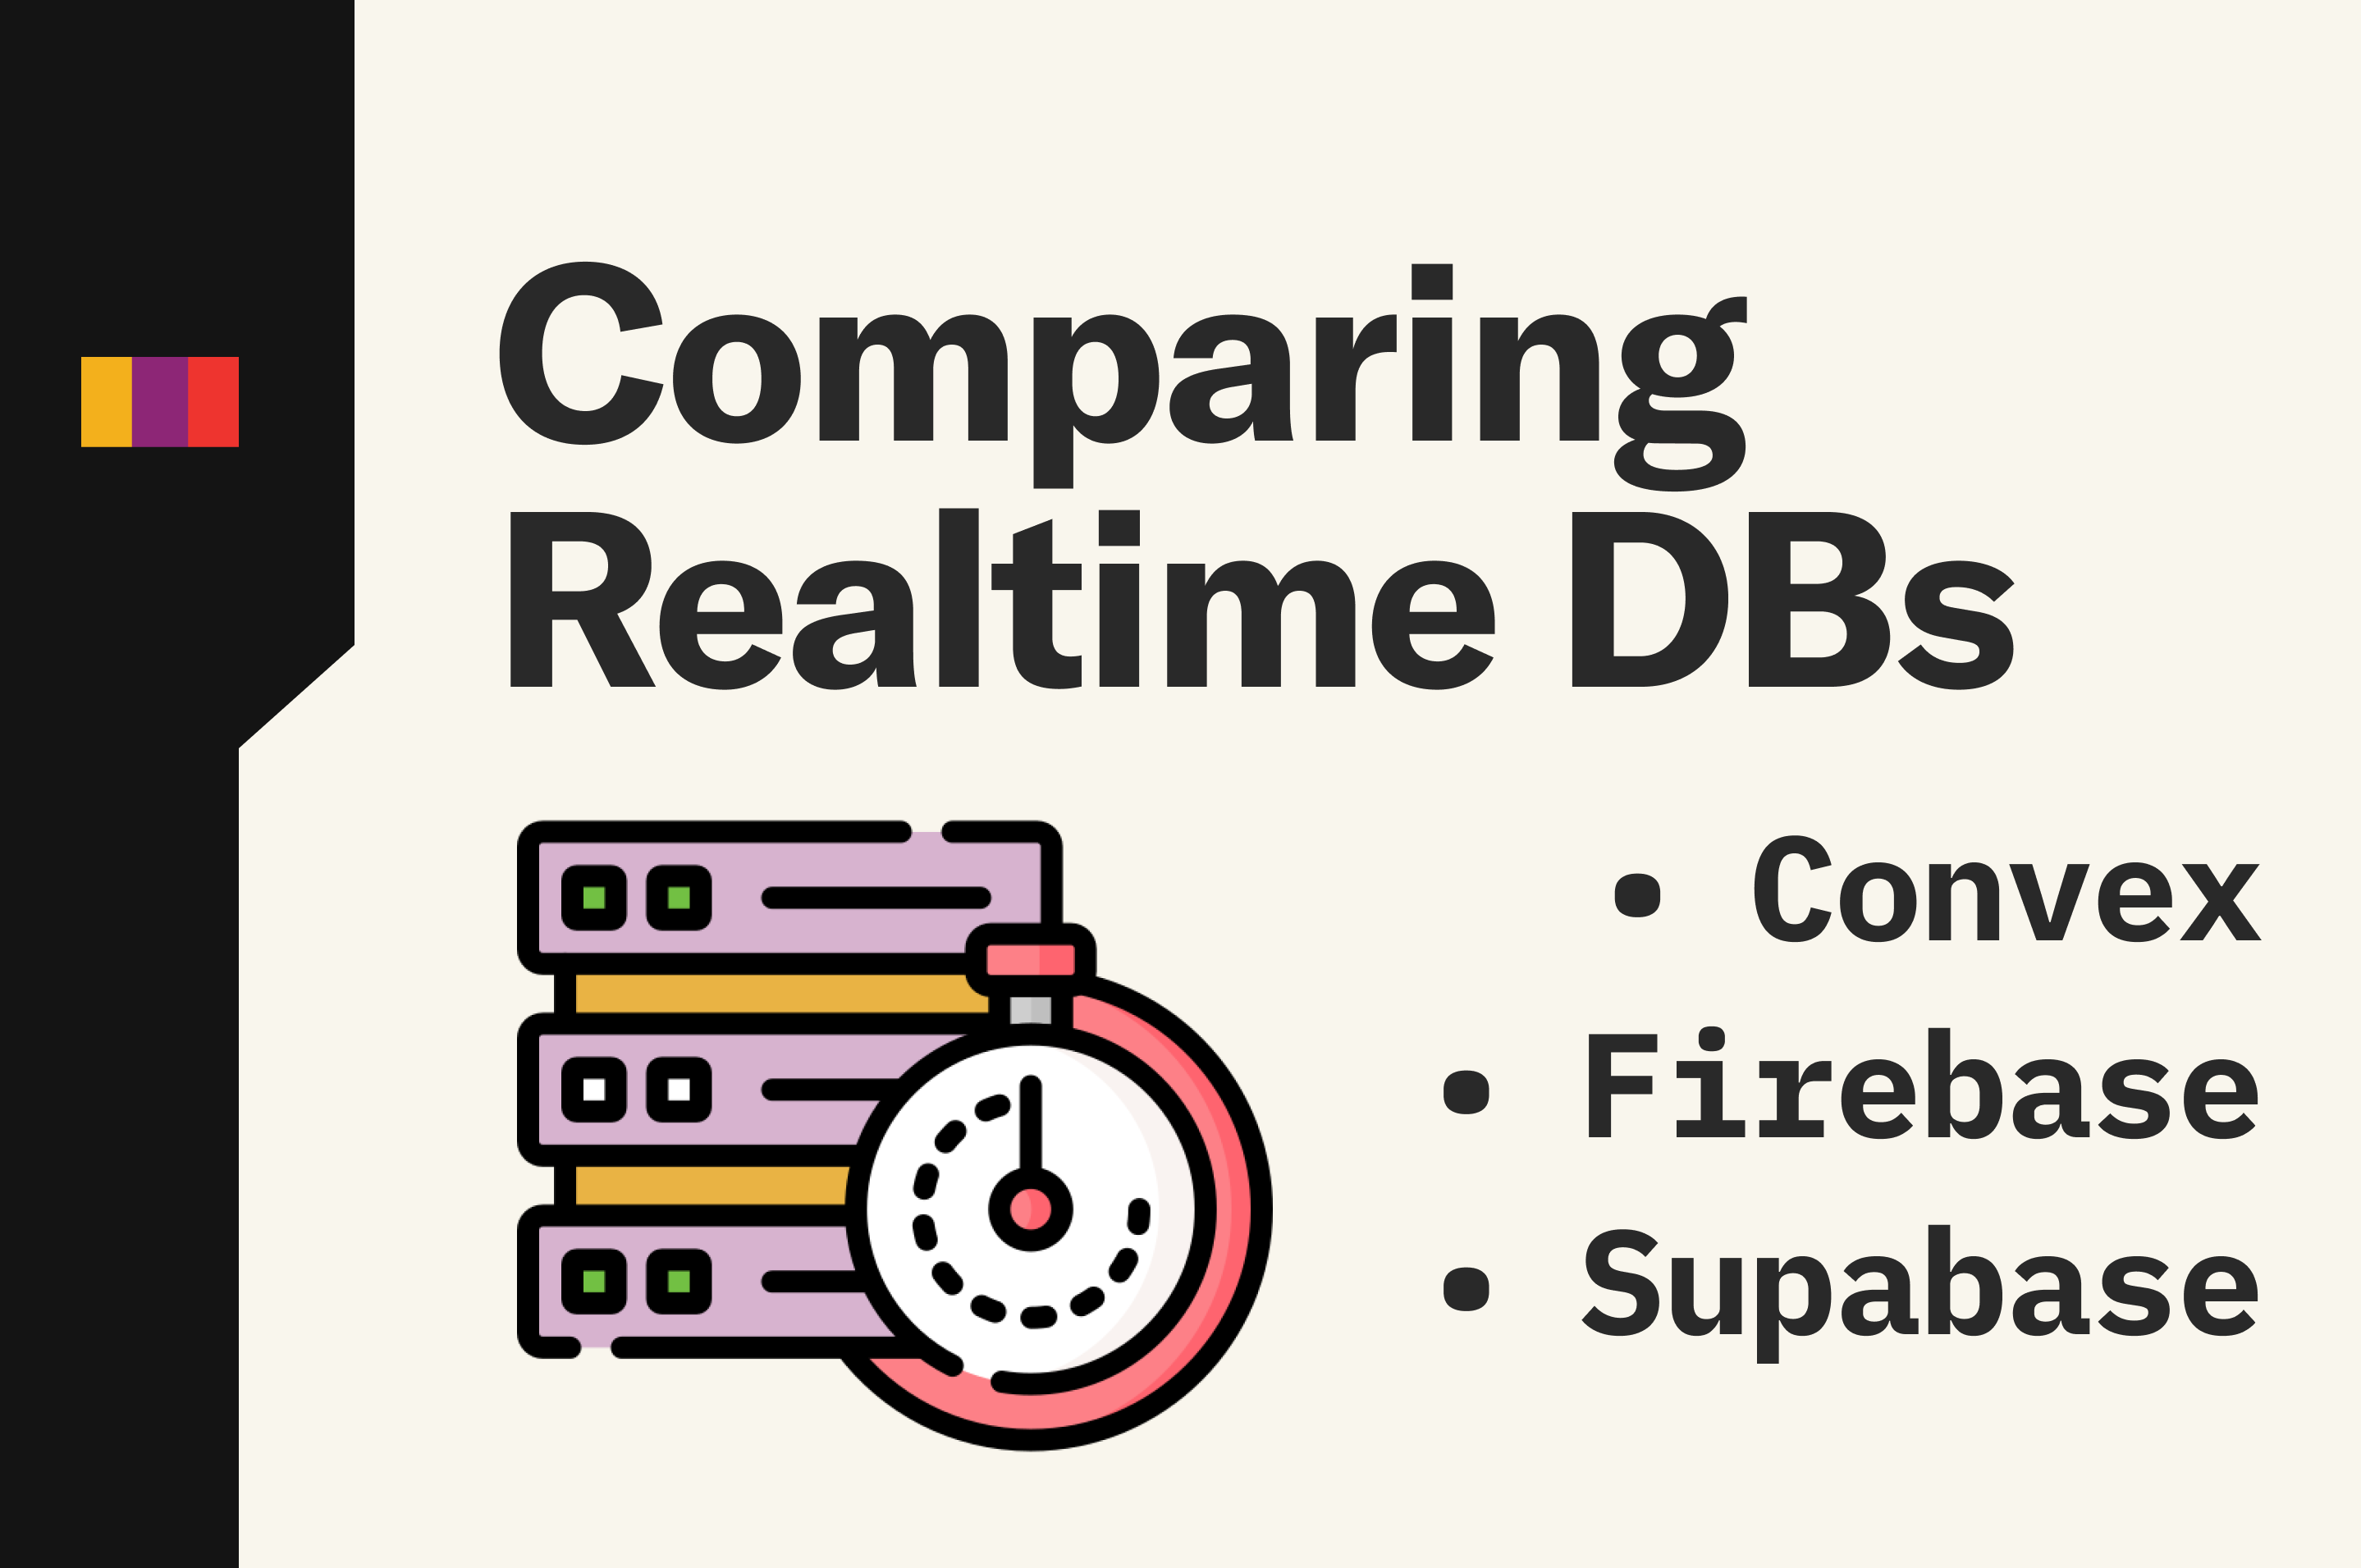 Comparing the realtime databases, firebase, convex, and supabase